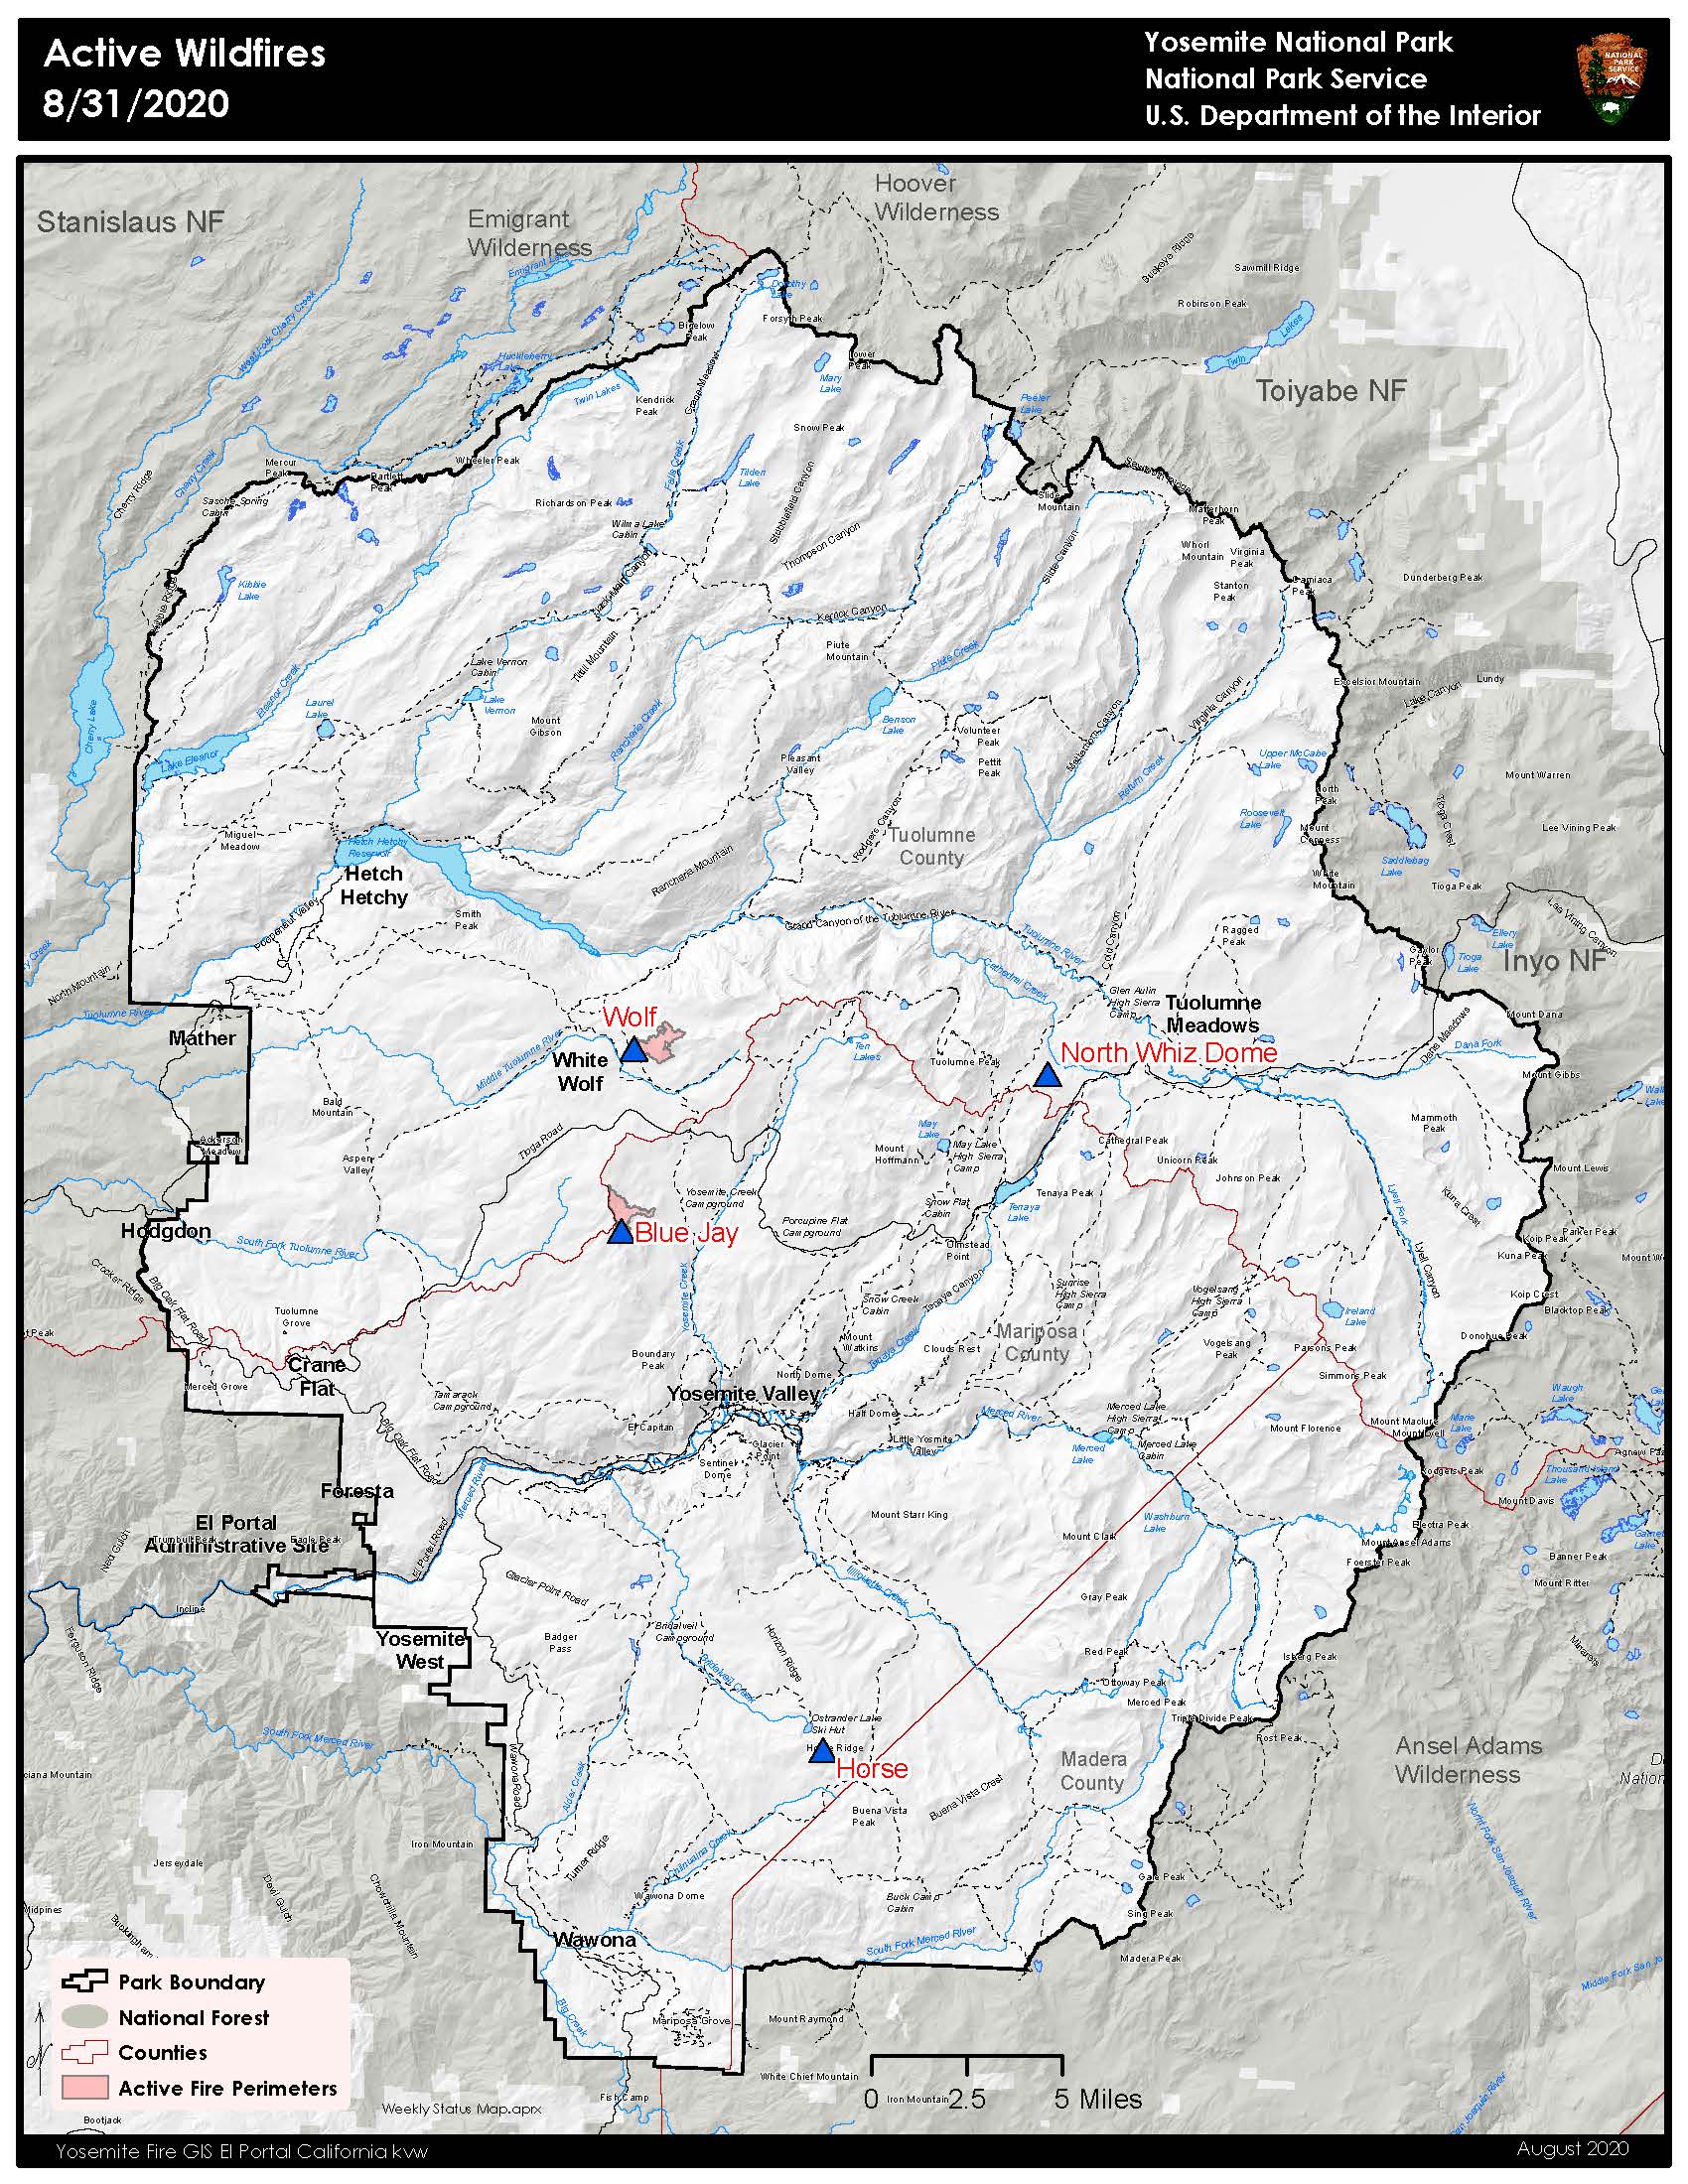 Map showing fires in Yosemite